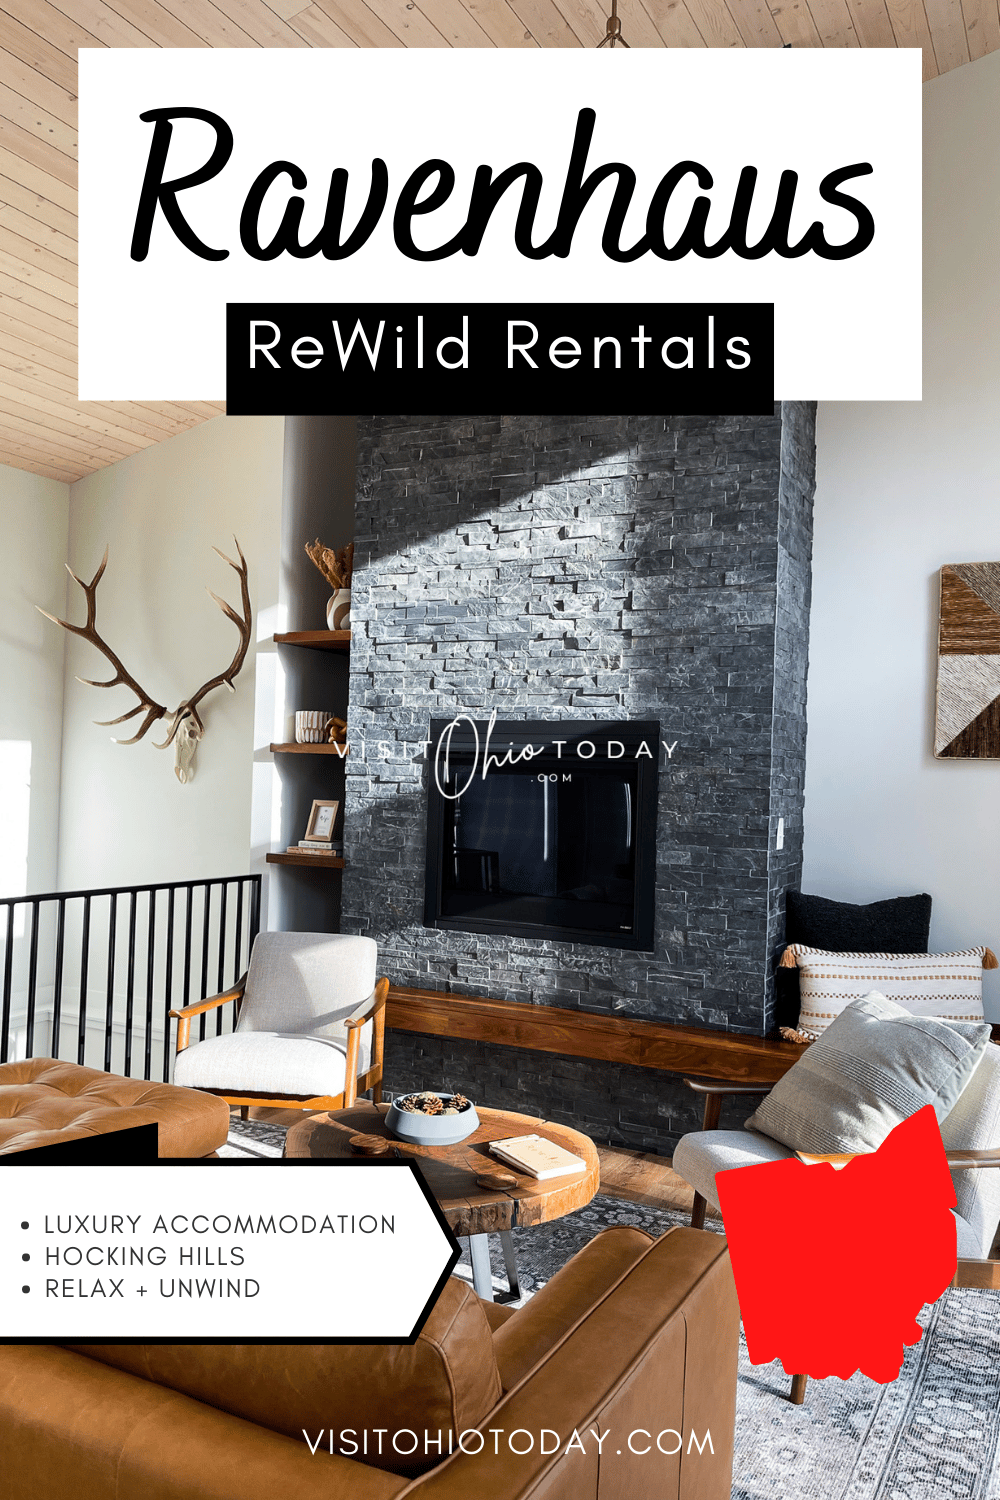 Ravenhaus by ReWild Rentals is a modern retreat located in the heart of Hocking Hills Ohio. This extremely well appointed cabin sleeps 8 with three bedrooms and three bathrooms.